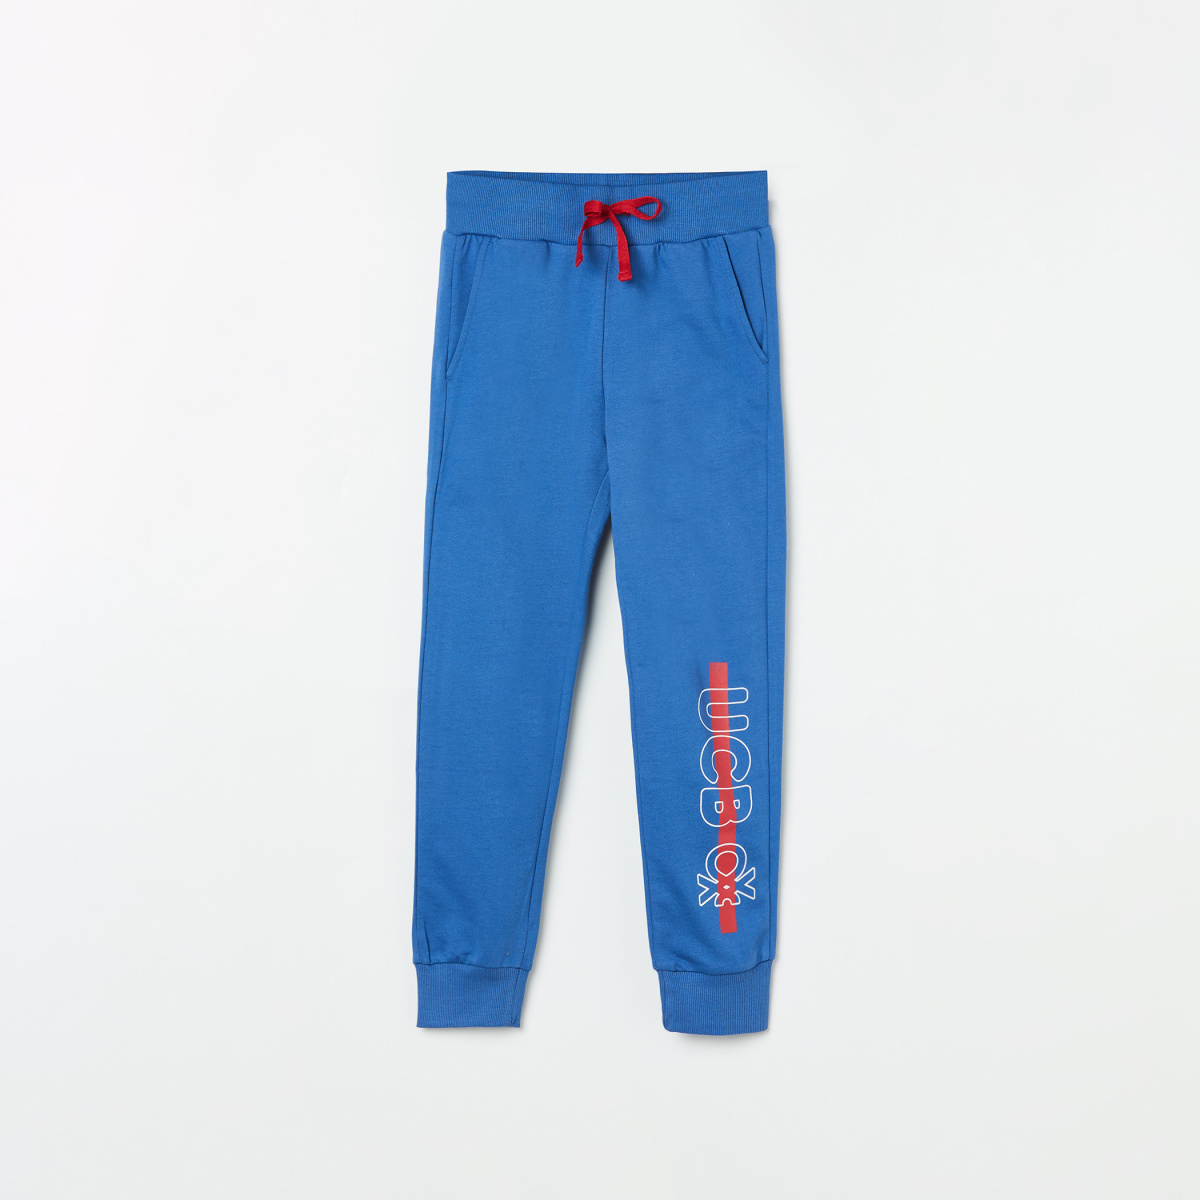 UNITED COLORS OF BENETTON Boys Printed Joggers